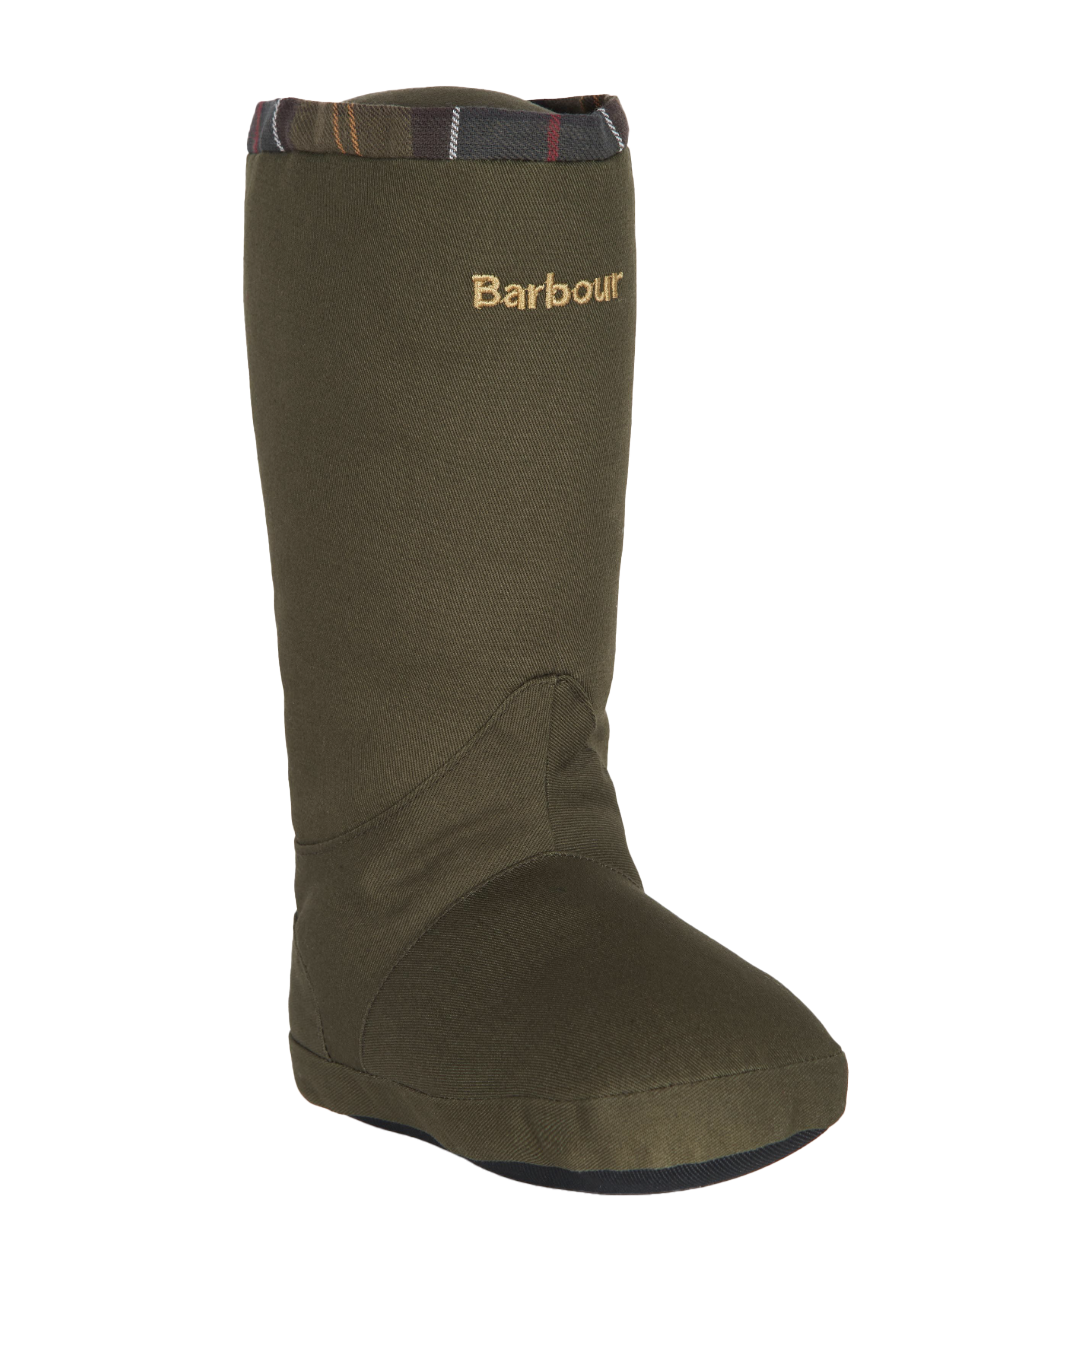 Barbour Dog Toy Boot